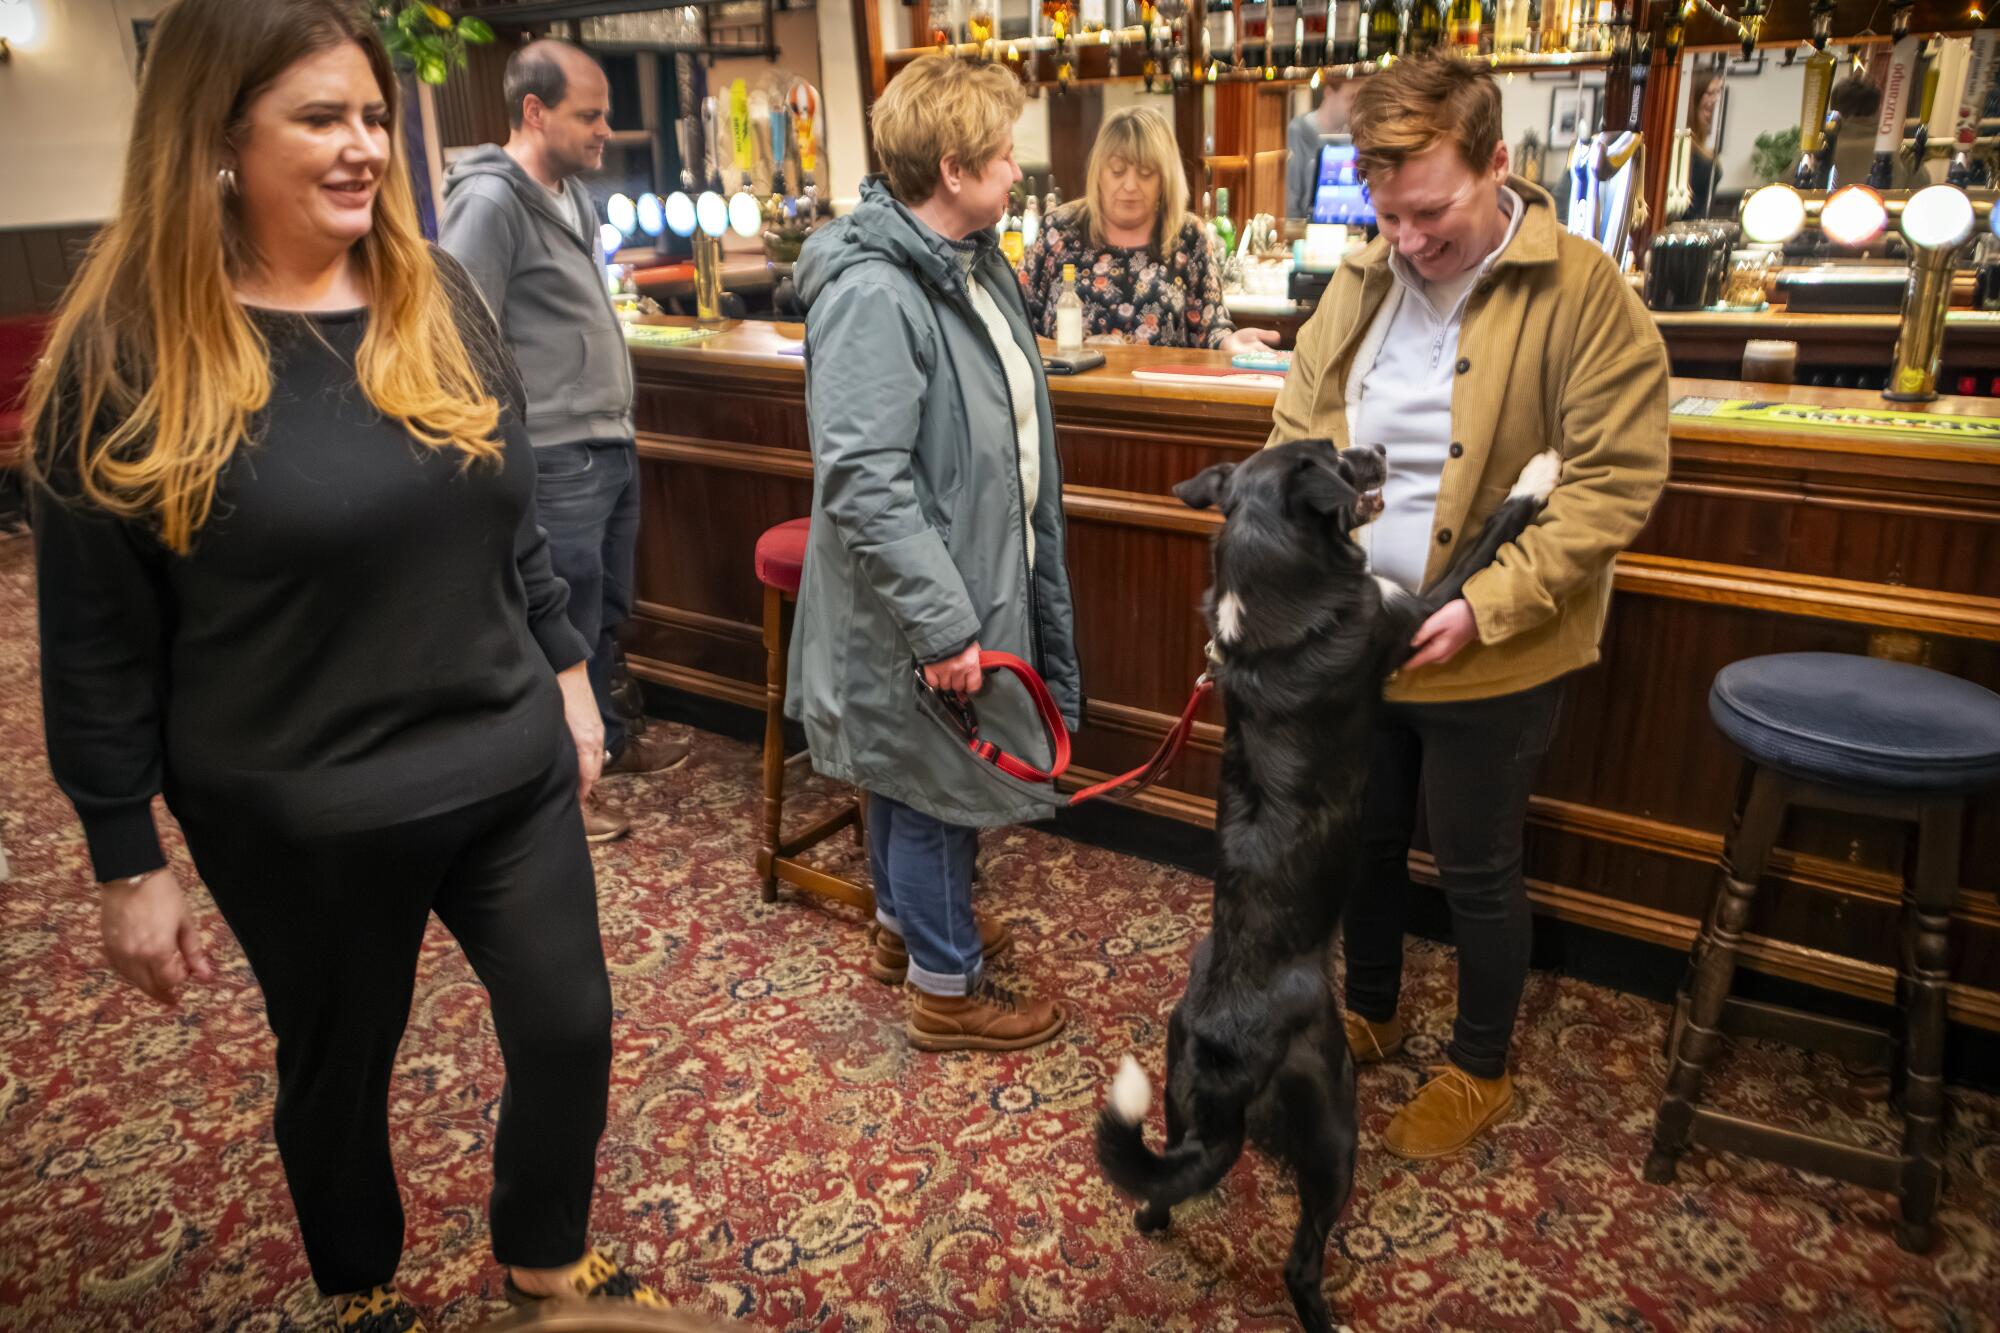 A dog on its hind legs raises its front paws over a person standing next to a bar  